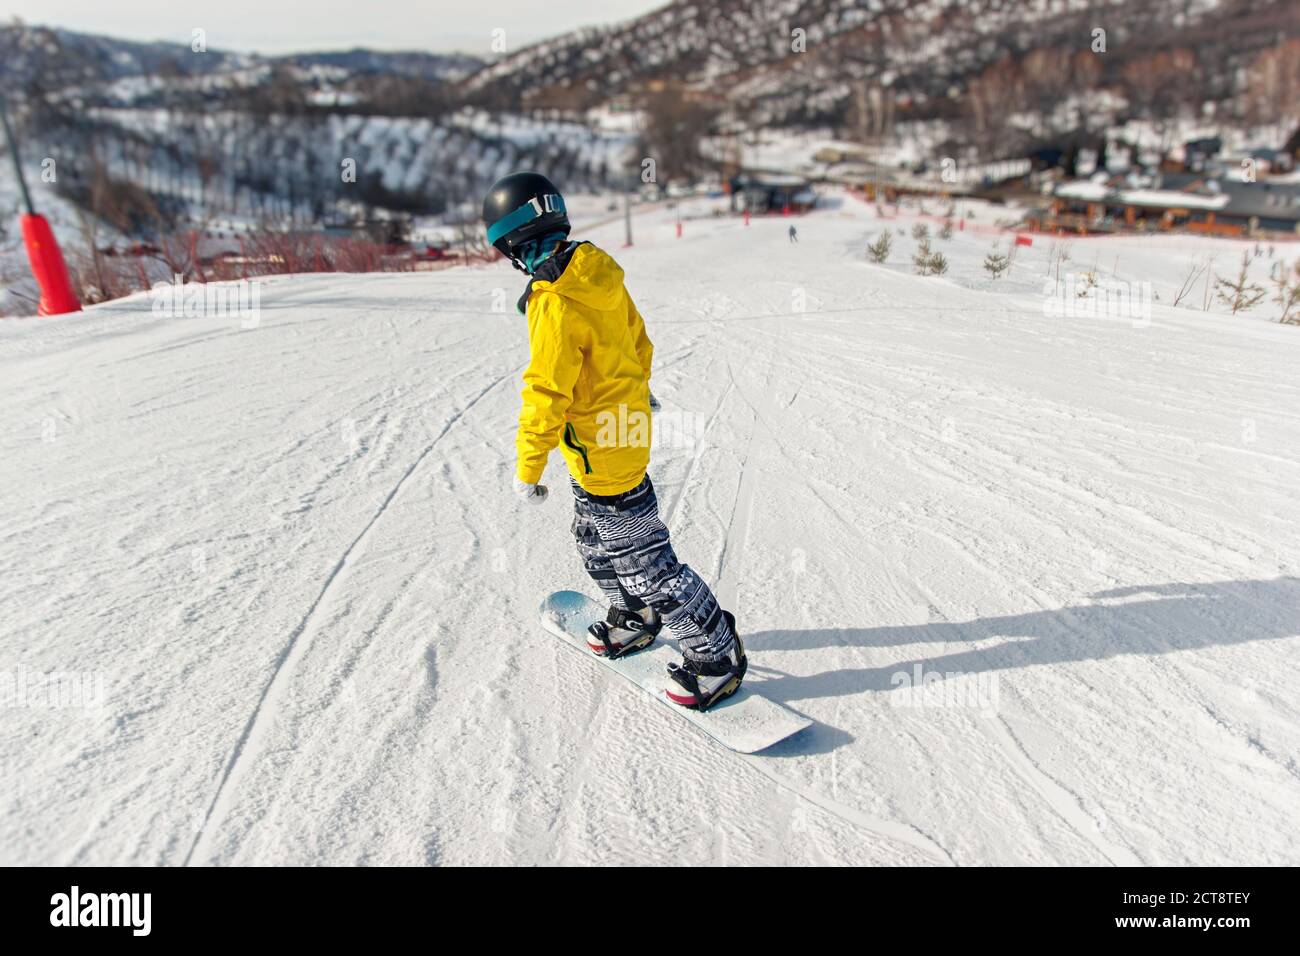 Snowboarder in black helmet, yellow jacket learns to snowboard technique on  the ski slope Stock Photo - Alamy